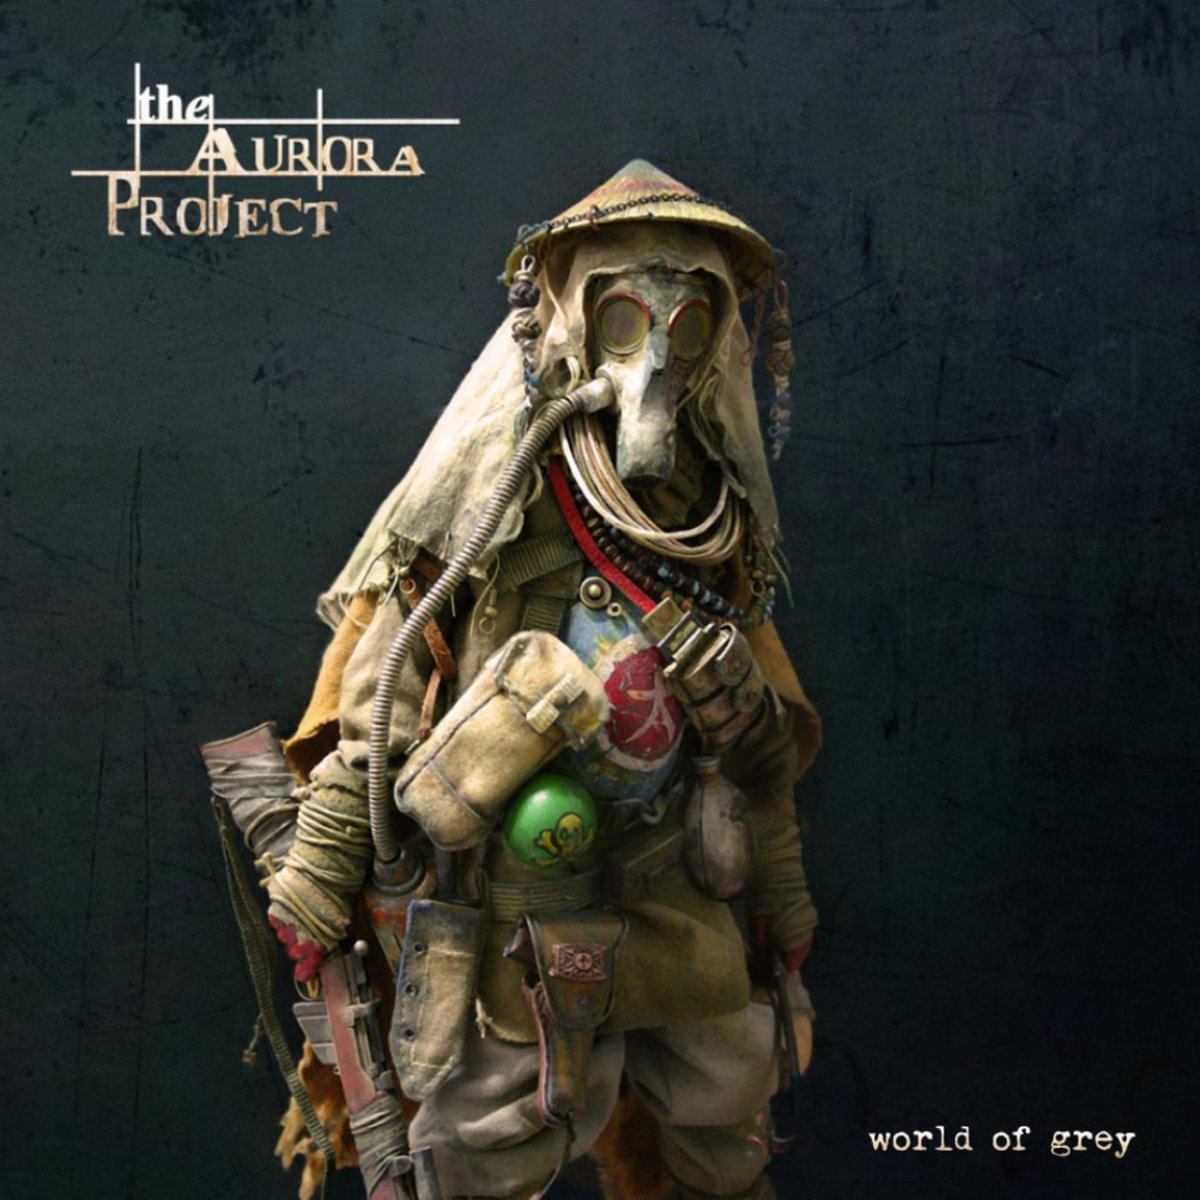 The Aurora Project: World of Grey